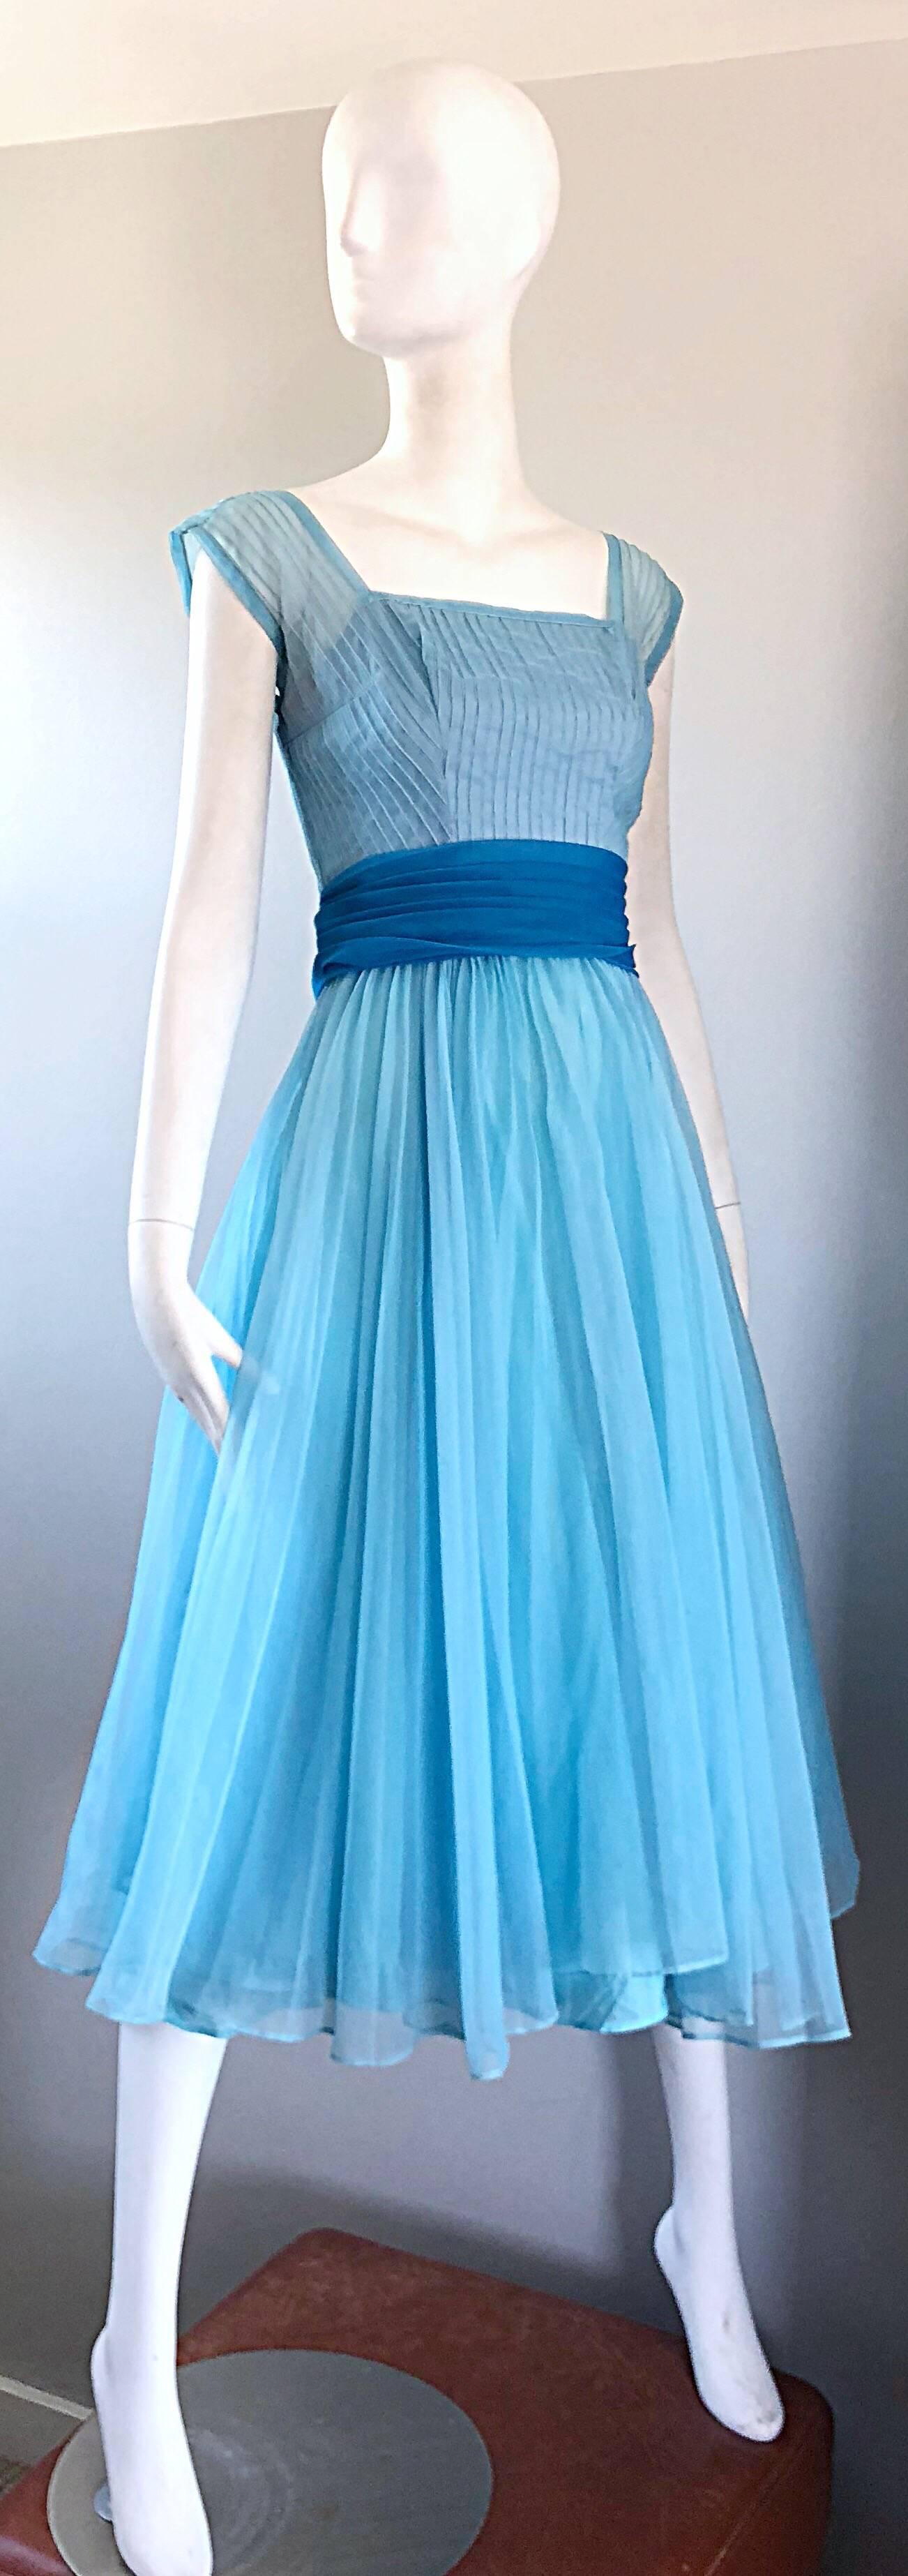 1950s Fred Perlberg Beautiful Robins Egg Blue Fit n' Flare Vintage 50s Dress For Sale 4